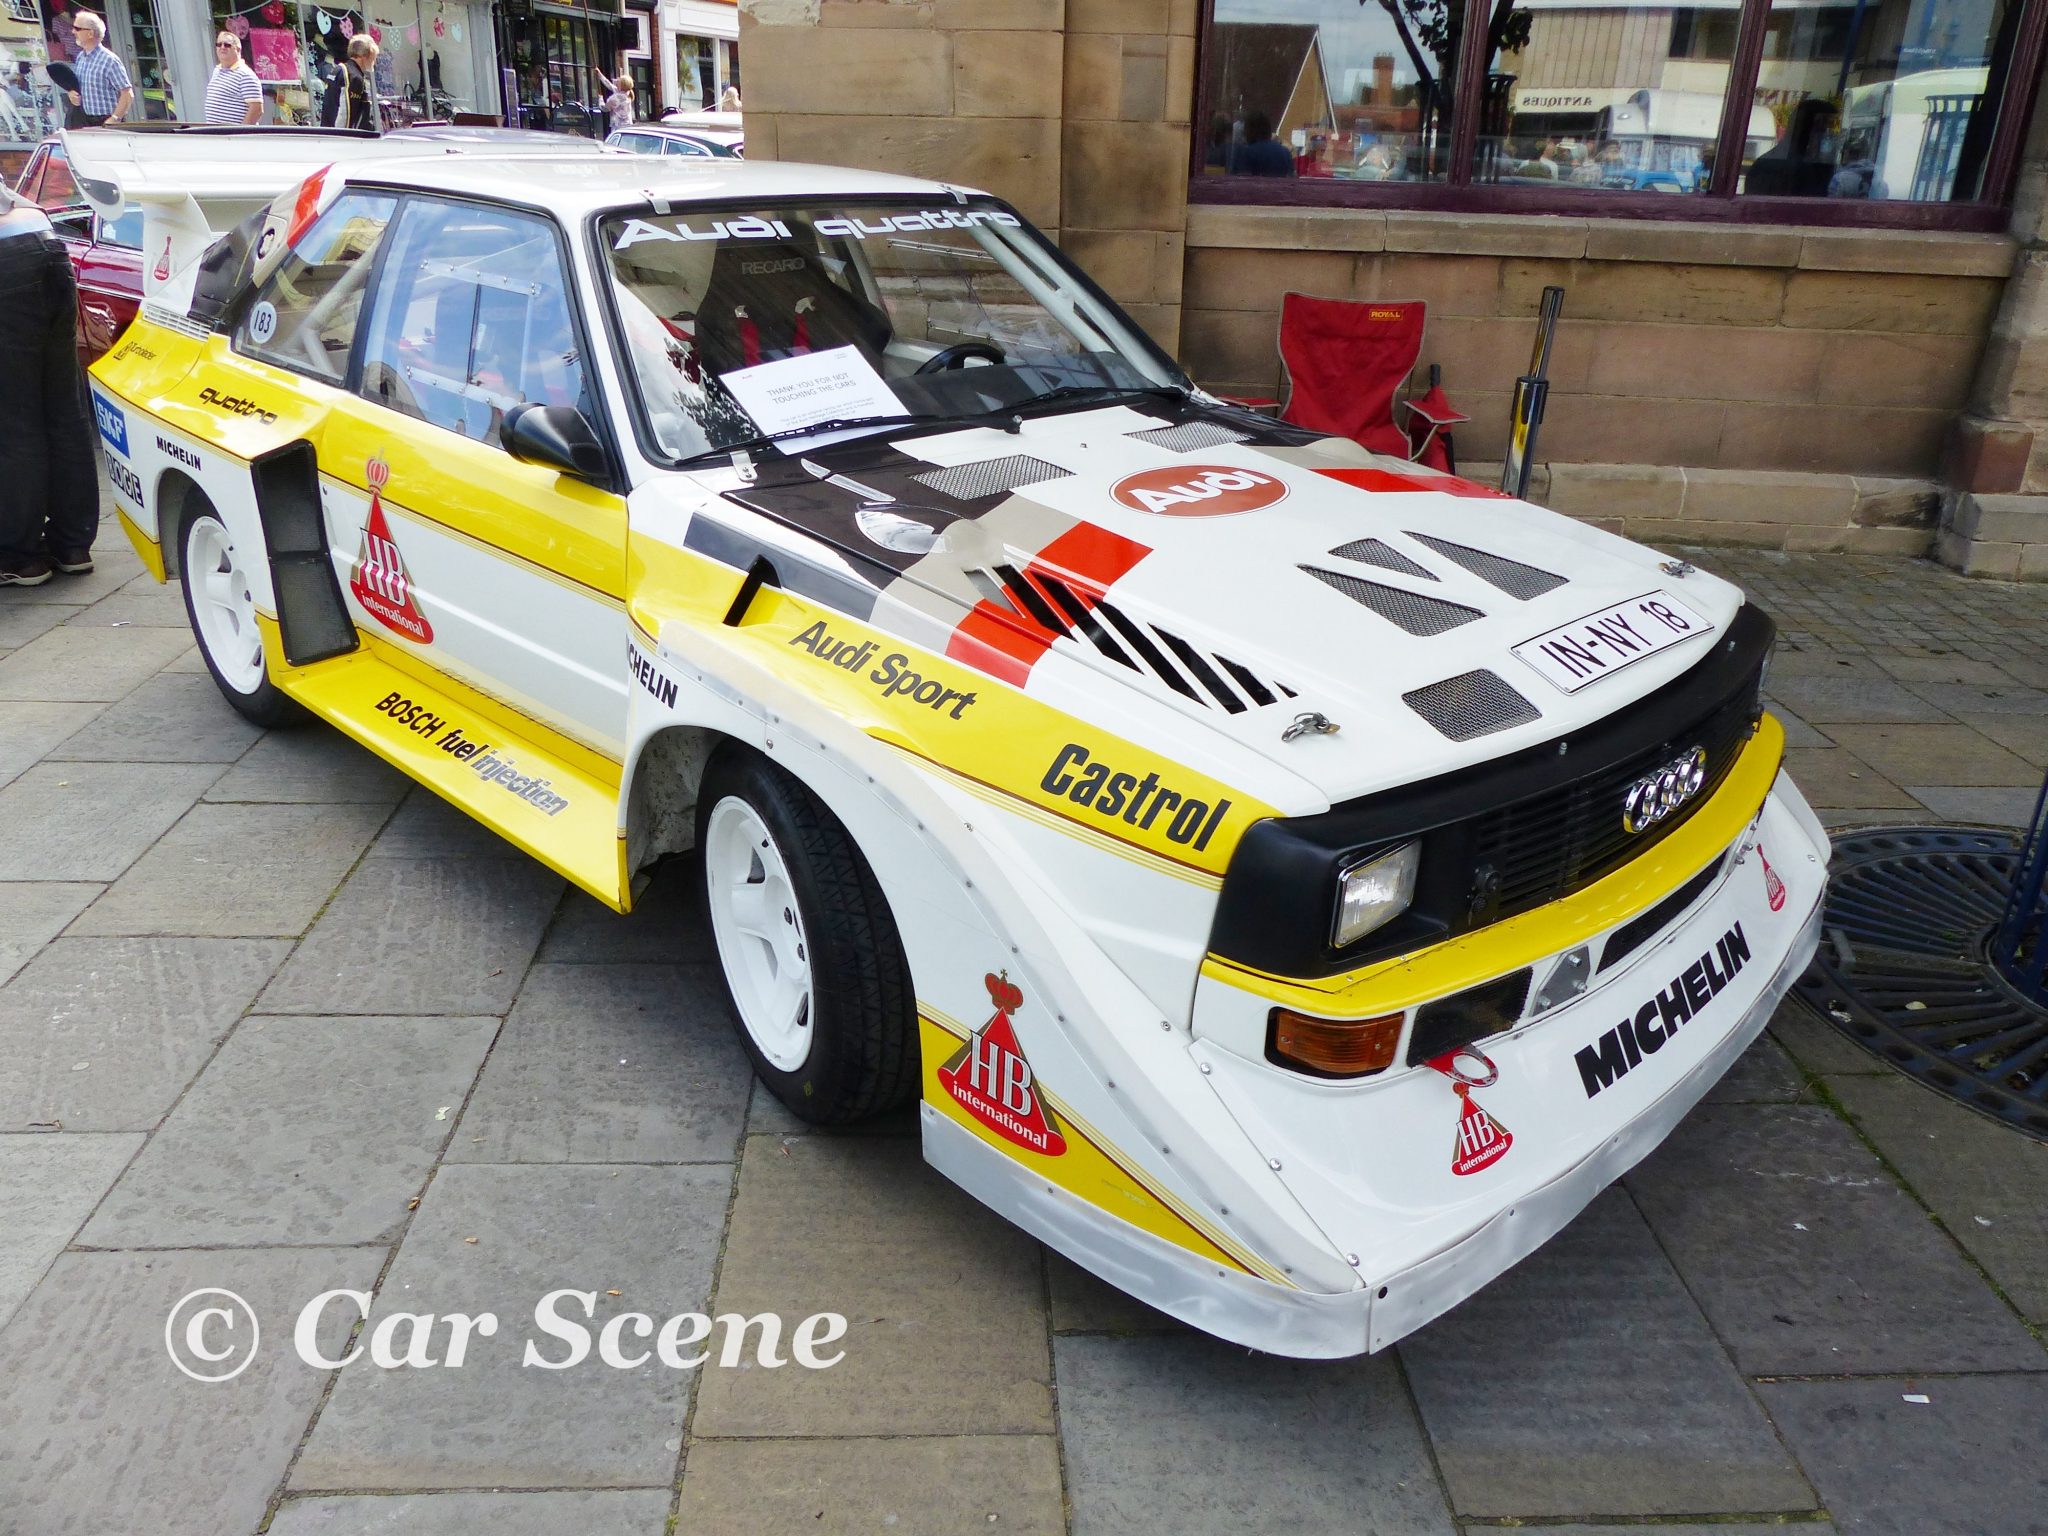 1982 Audi Quattro S1 Group B Rally Car front three quarters view